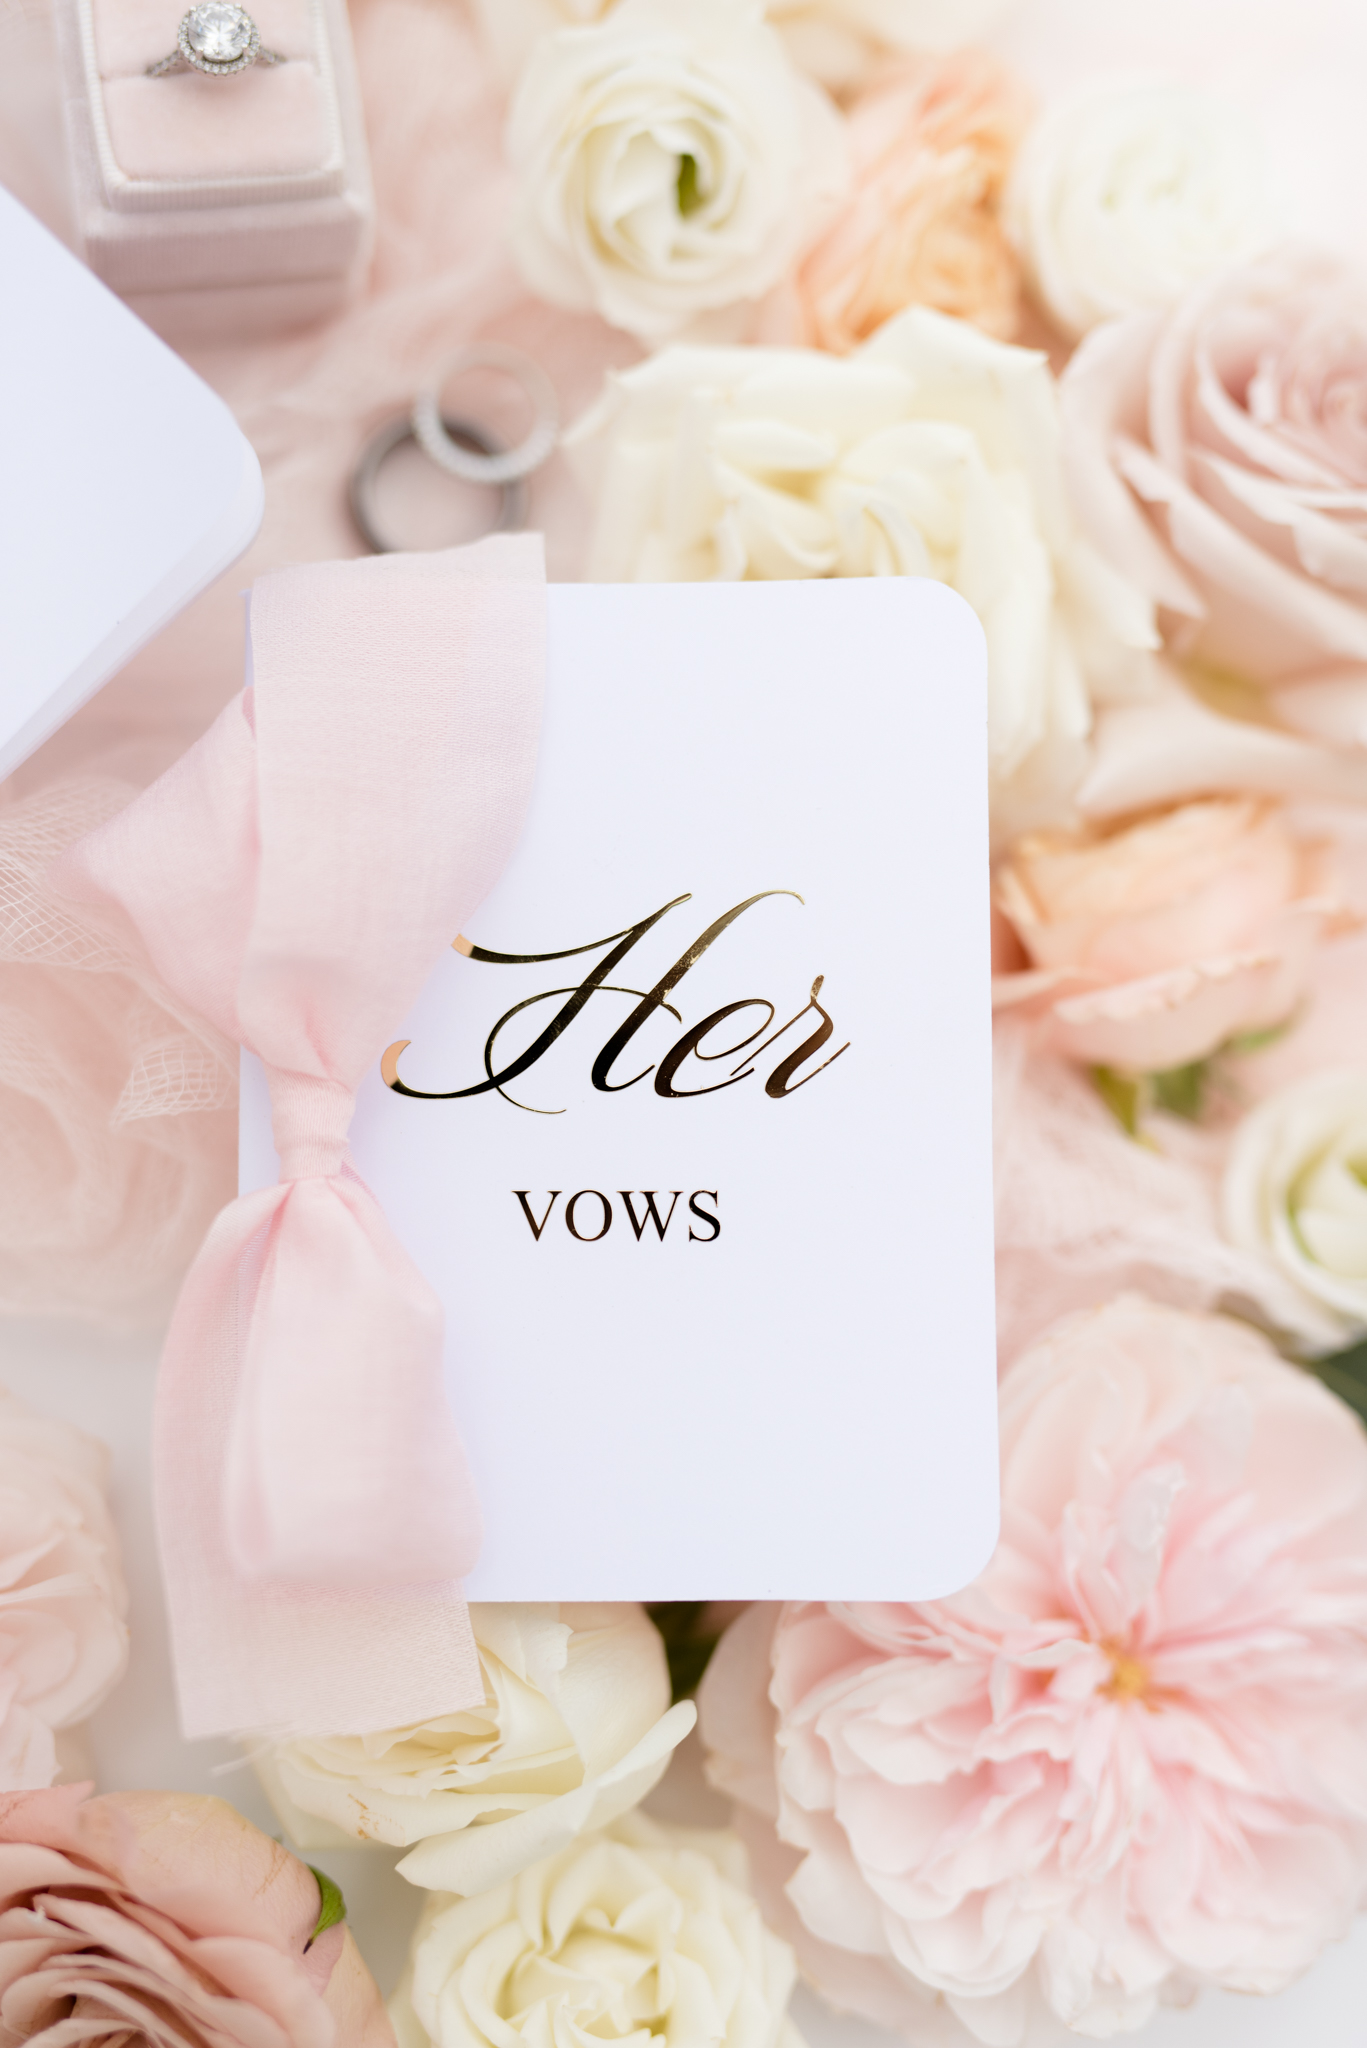 Bride's vow book sits on flowers.